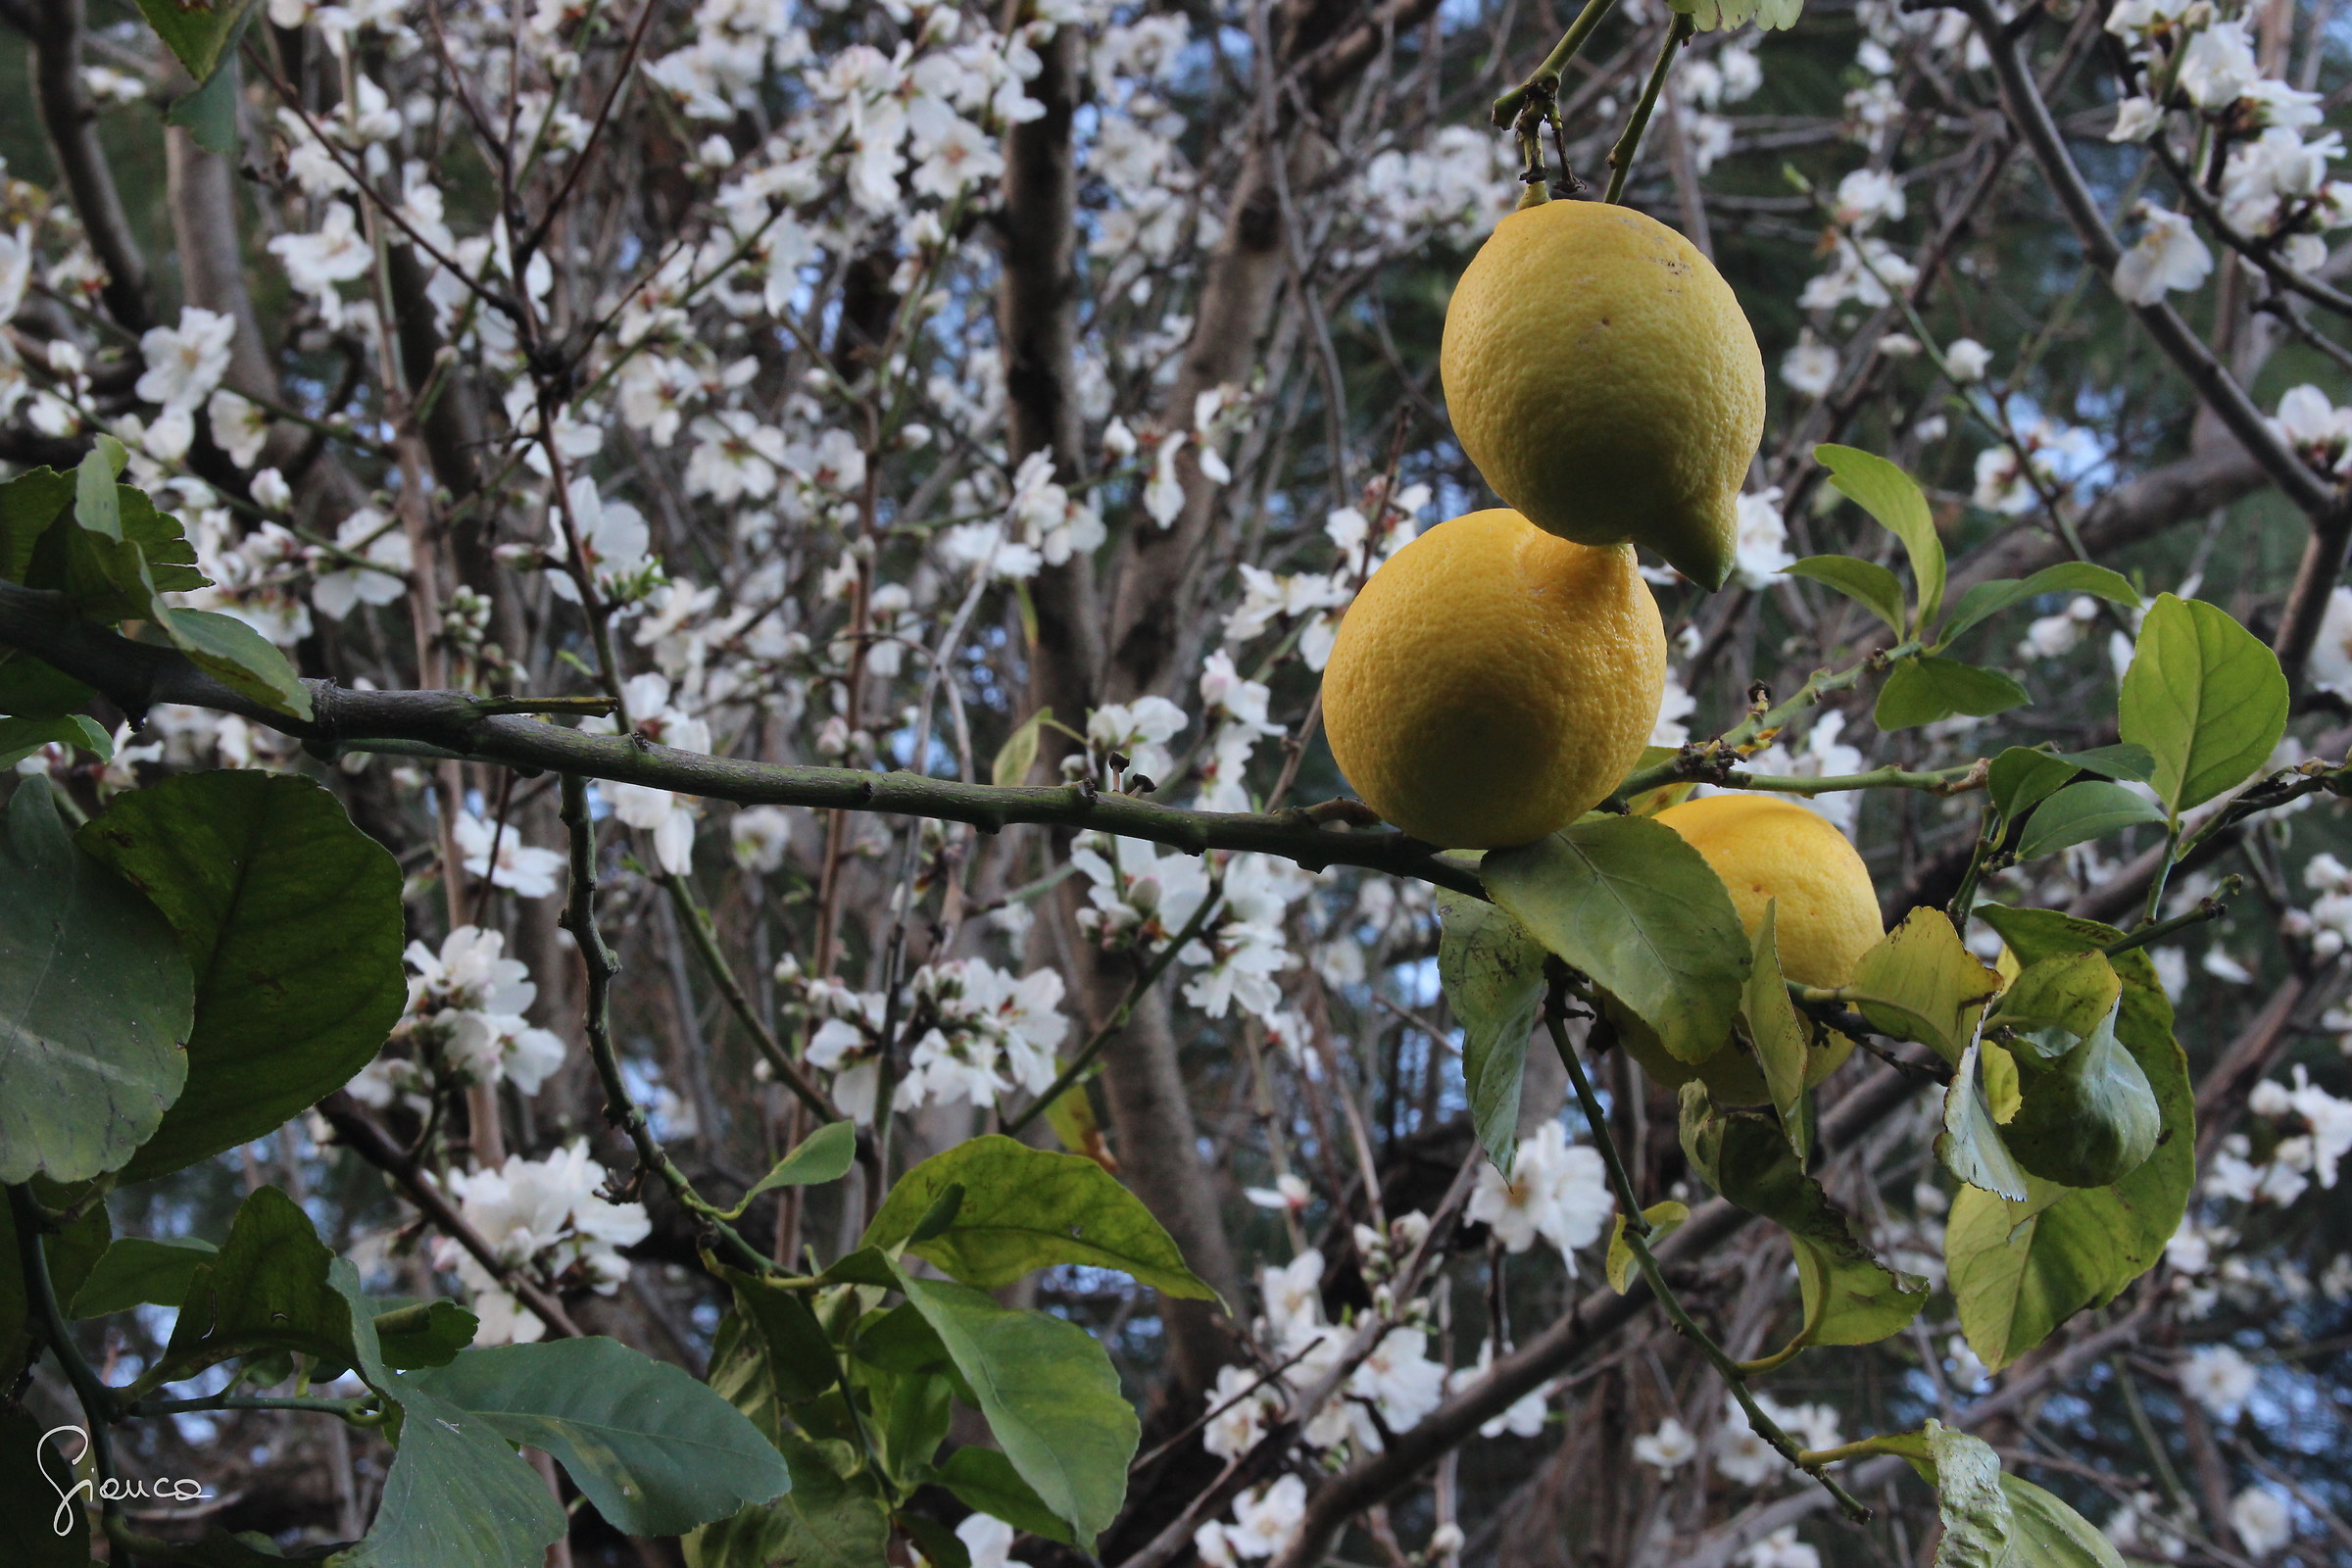 The Sicilian winter lemon and almond trees in bloom...